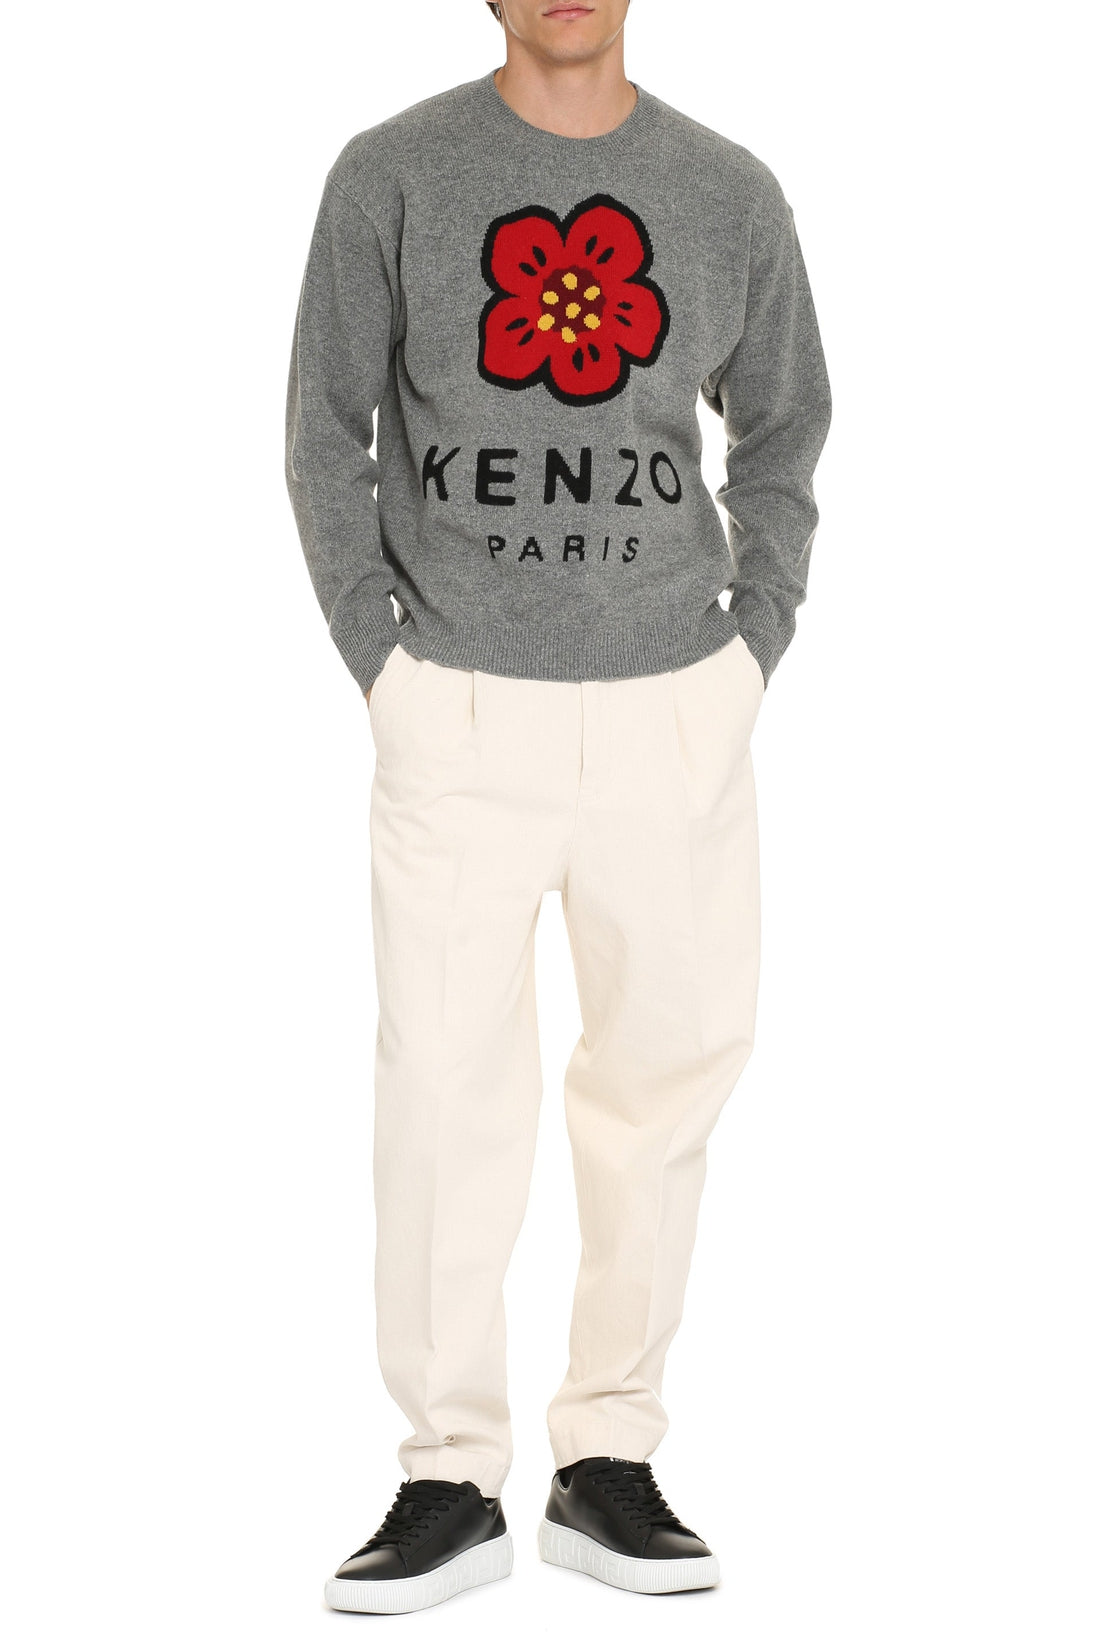 Kenzo-OUTLET-SALE-Intarsia wool sweater-ARCHIVIST